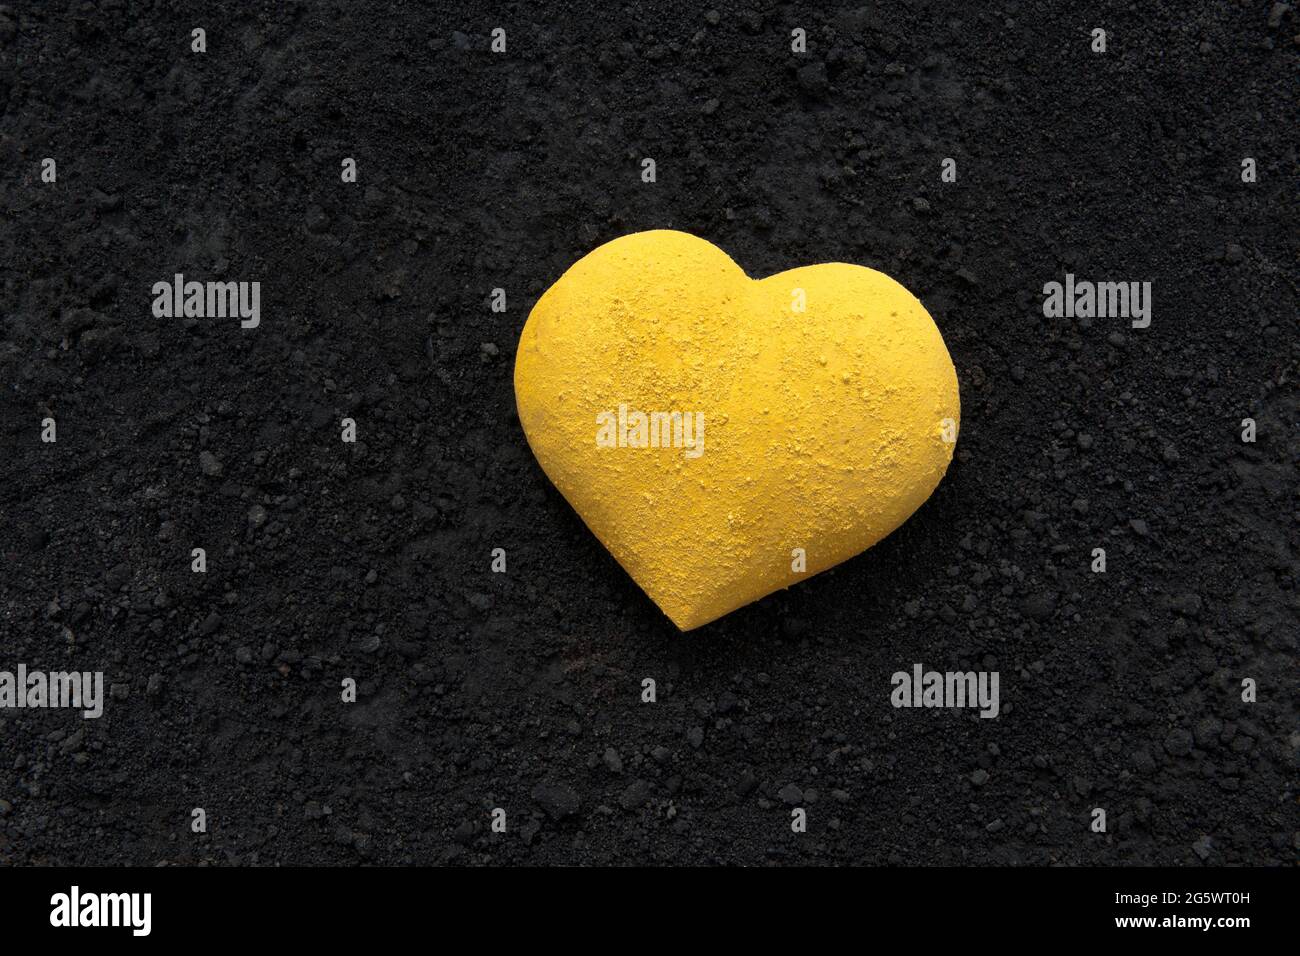 3 dimensional heart shape painted bright yellow with powder paint, placed on a background of black cinders Stock Photo